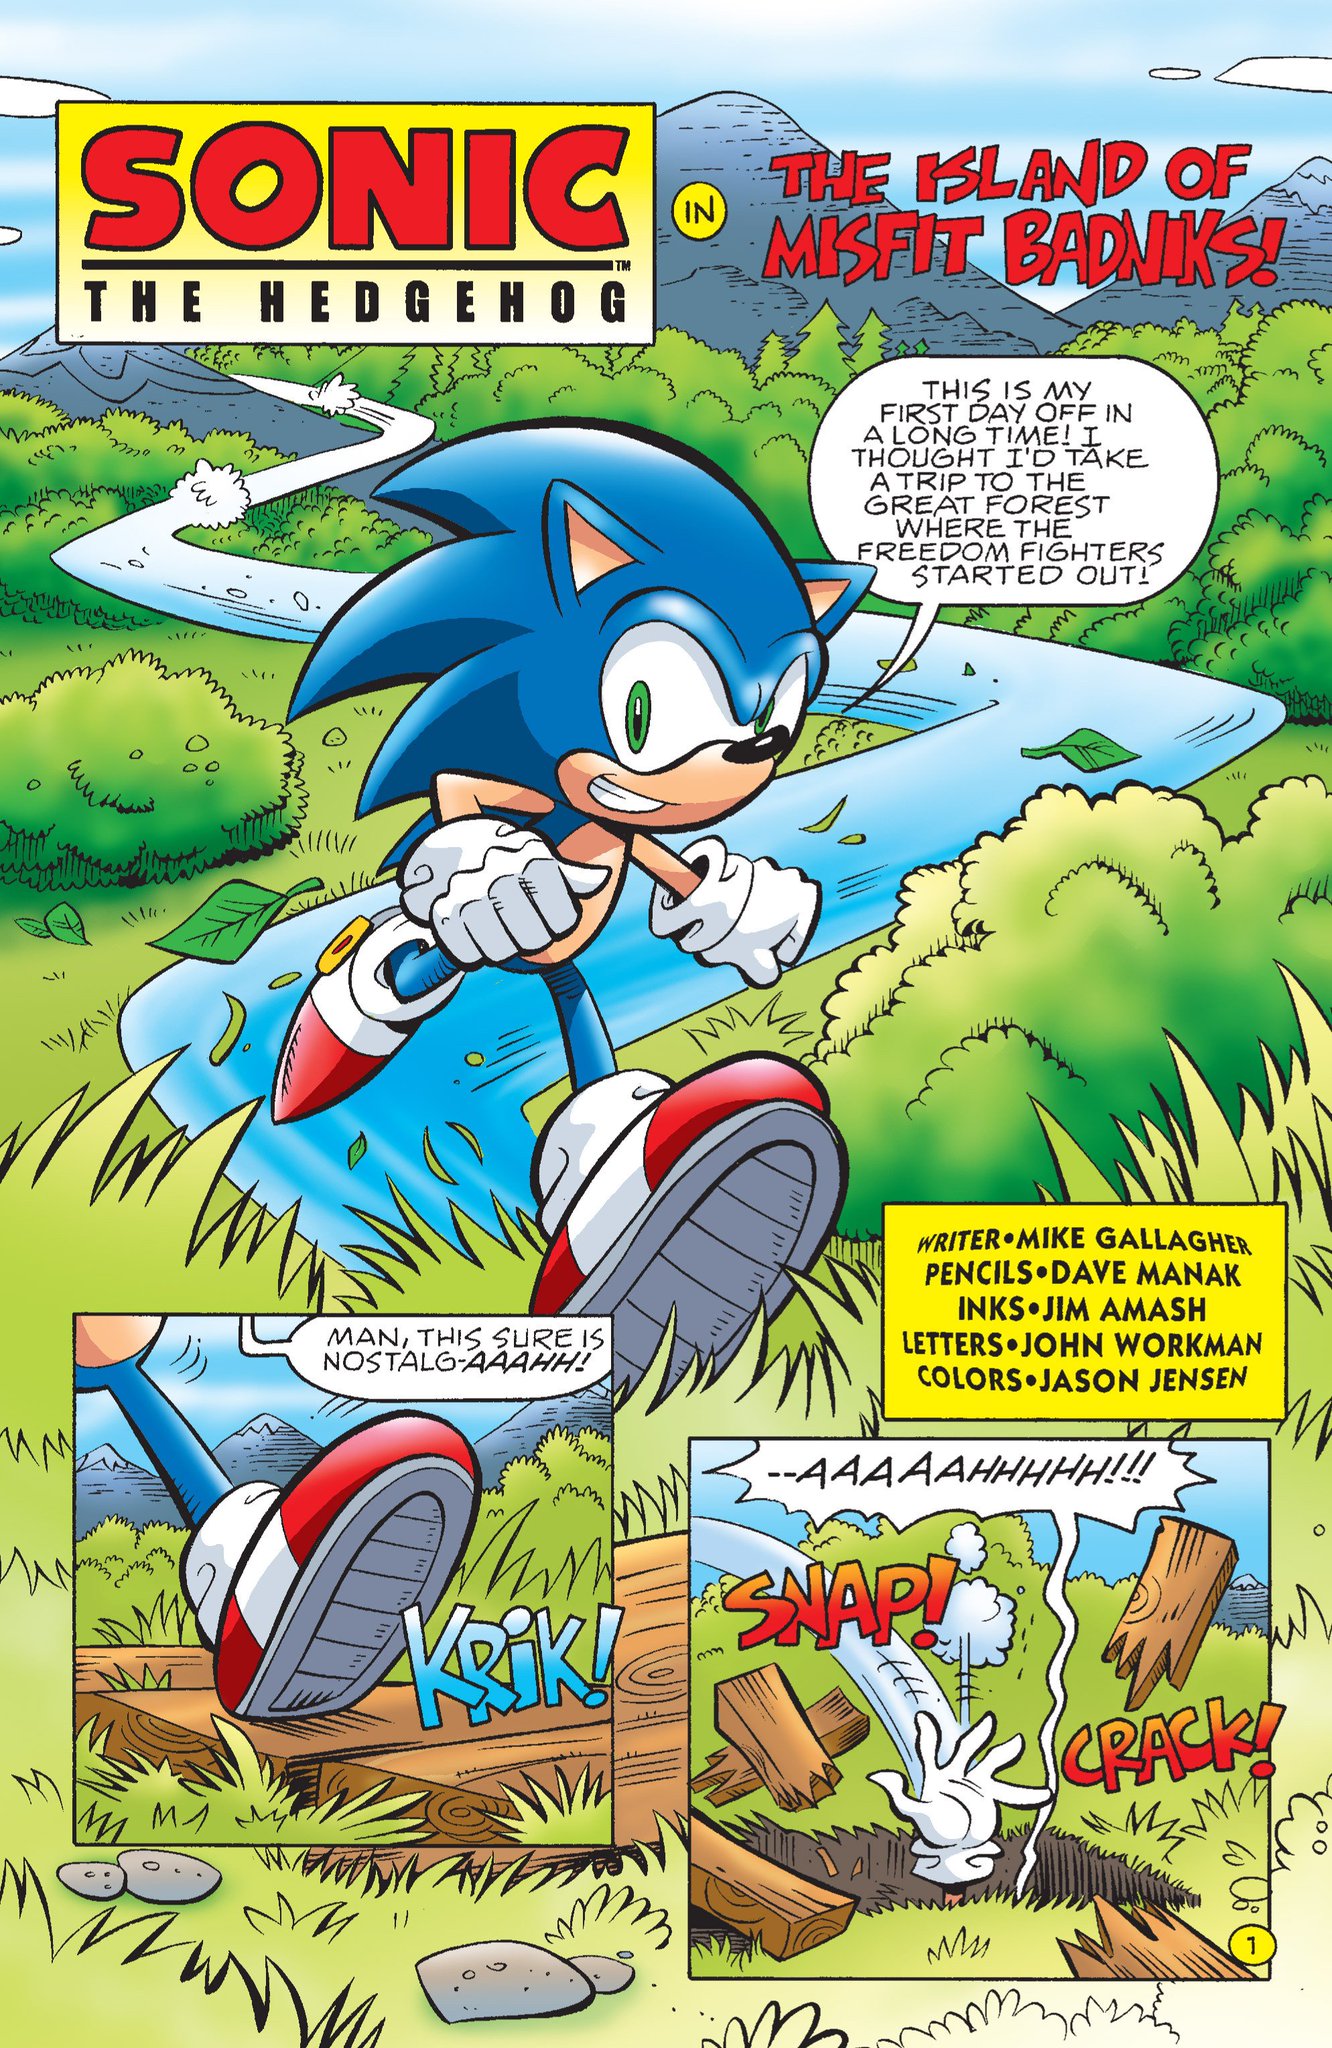 The Lycans In The Wind - Chapter 1 - Spam5192 - Sonic the Hedgehog